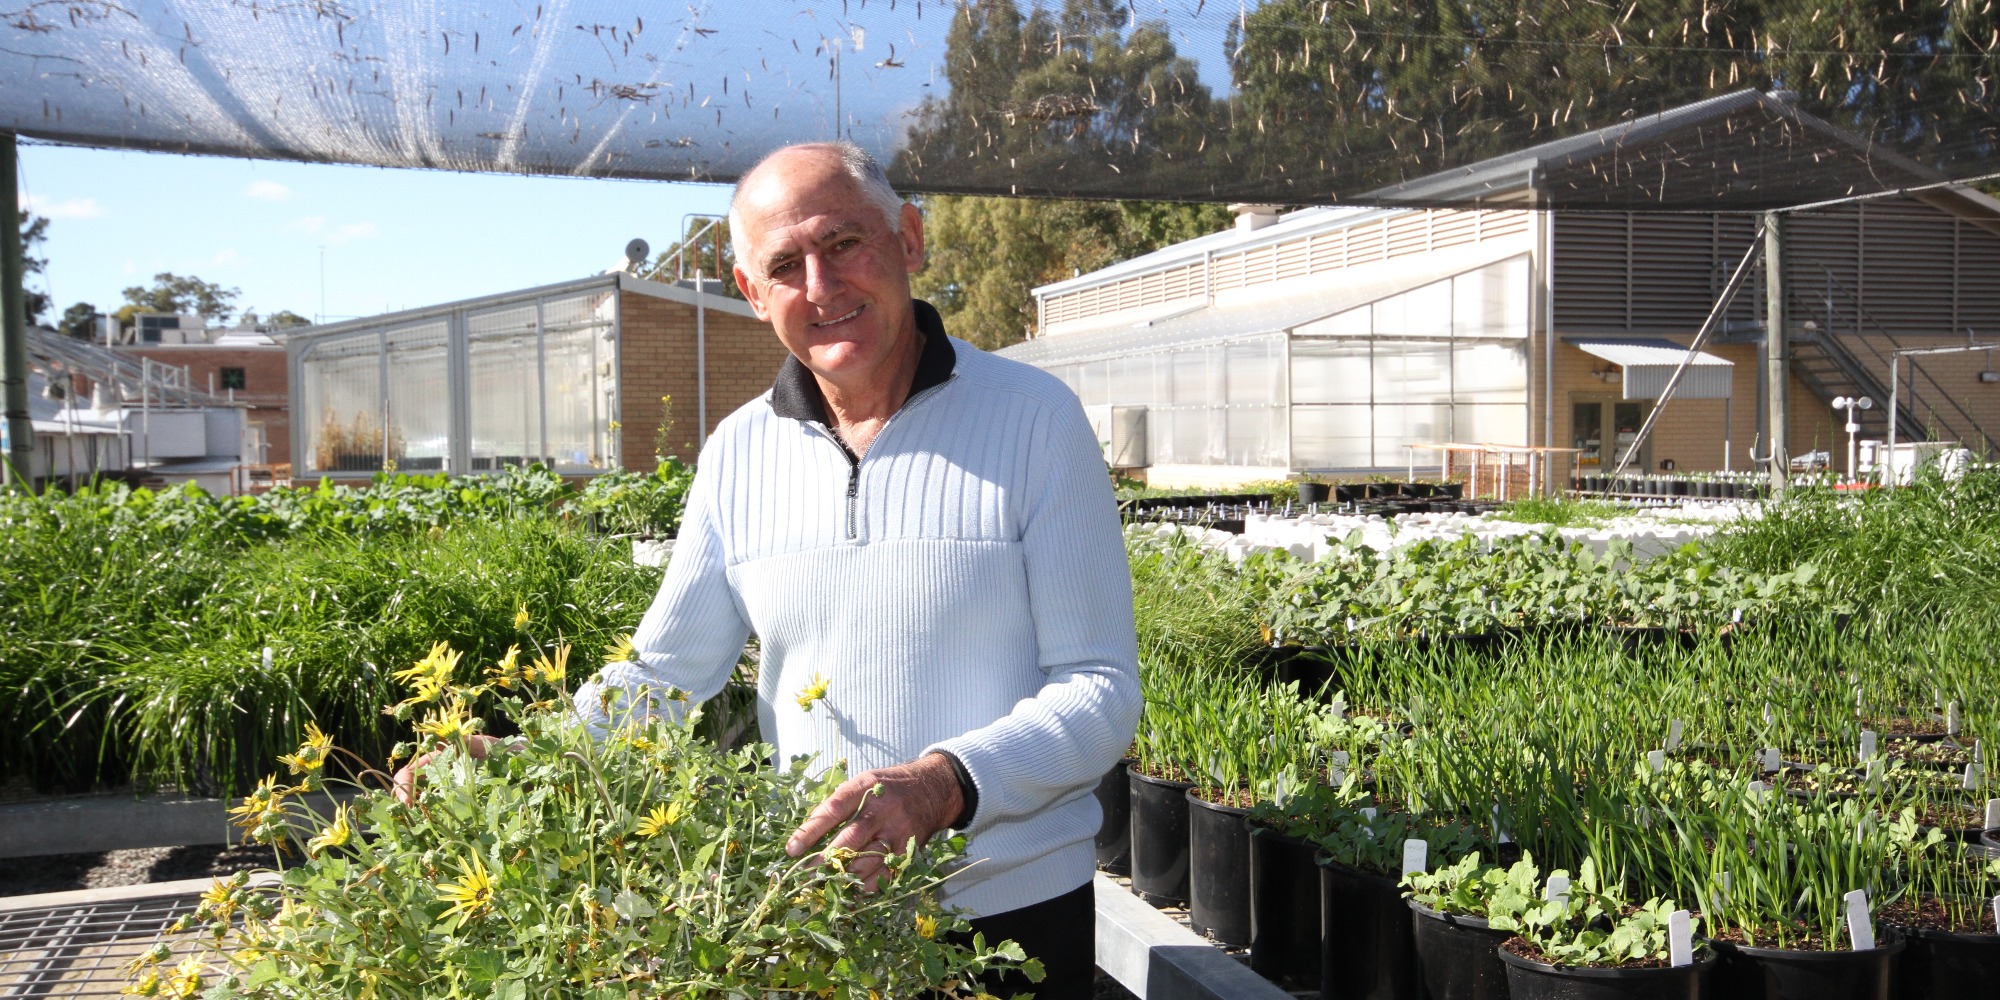 Stephen Powle with plant in greenhouse